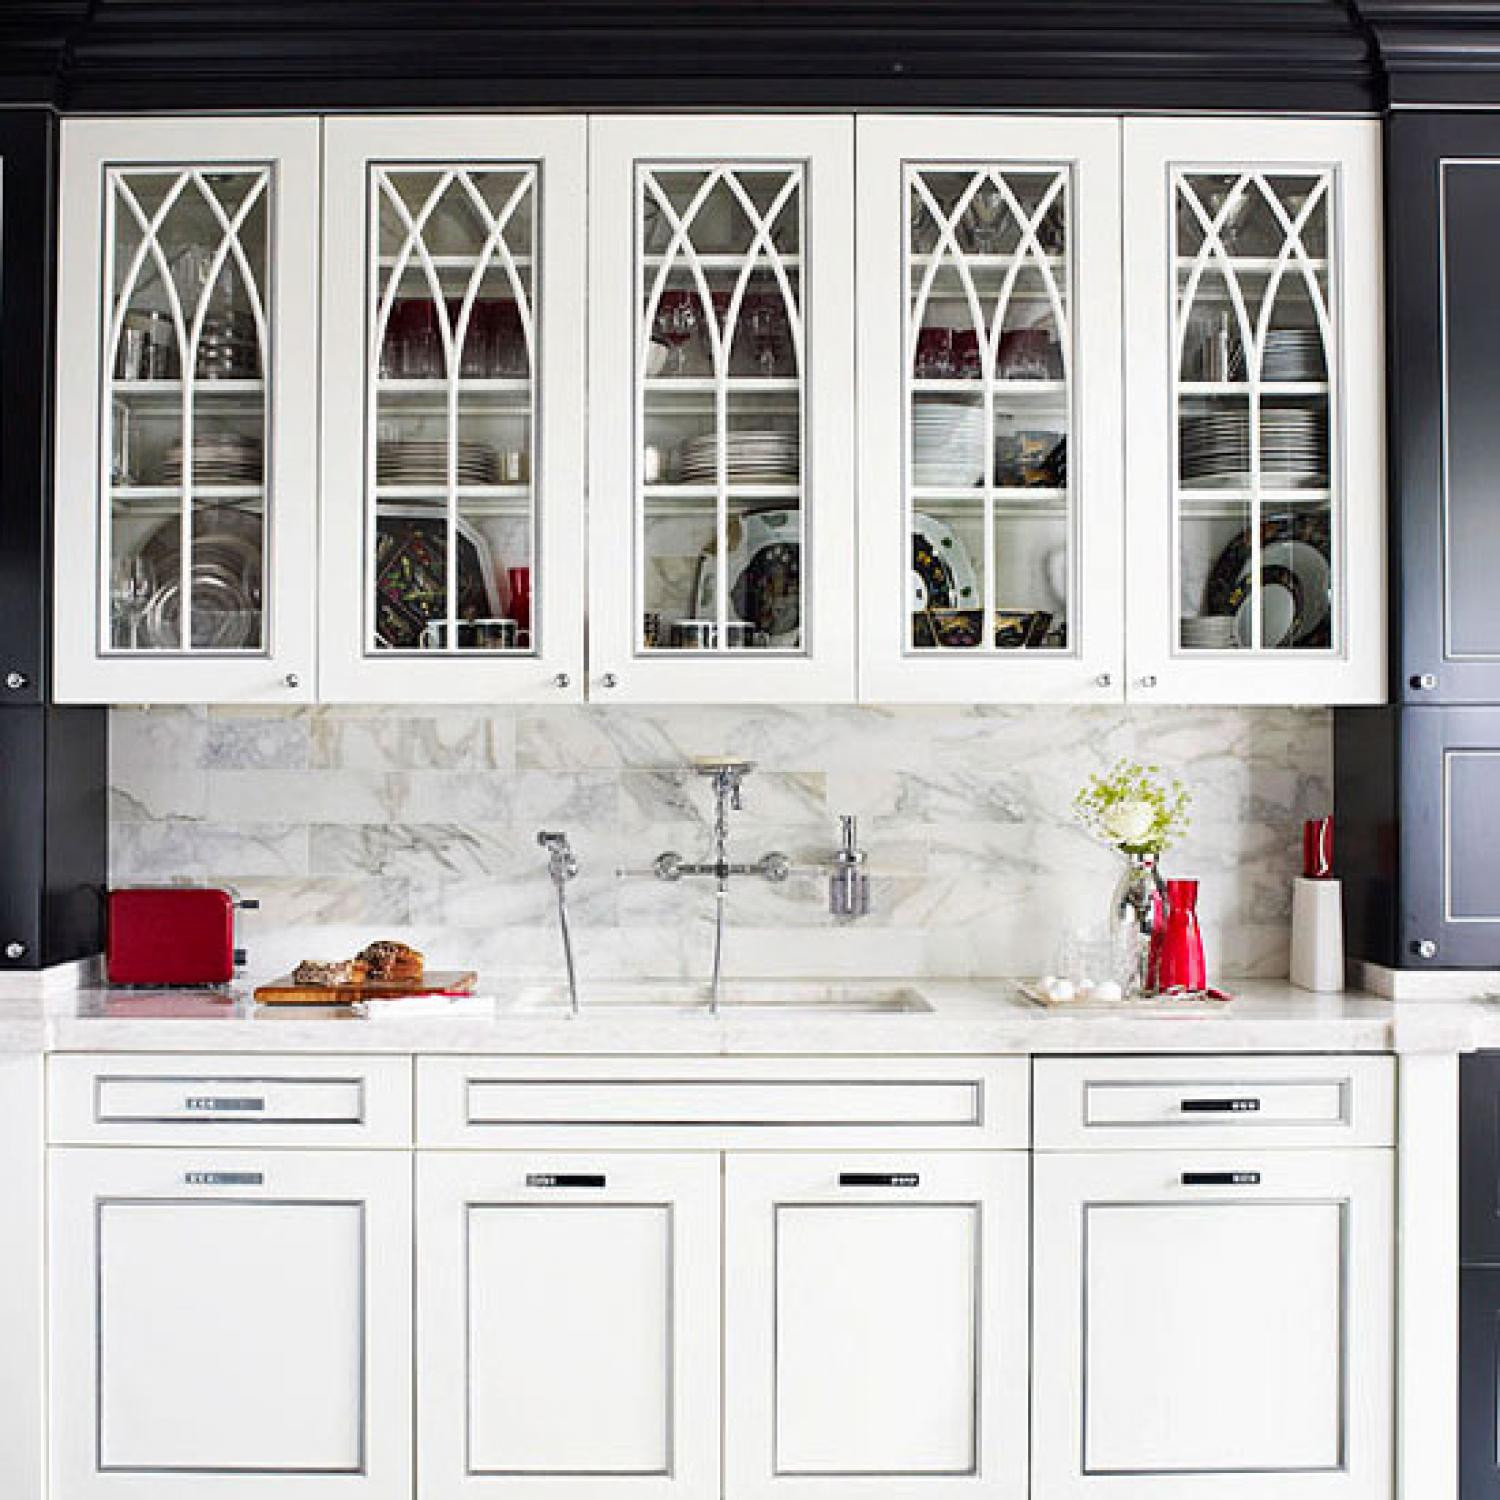 Kitchen Cabinet Doors
 Distinctive Kitchen Cabinets with Glass Front Doors